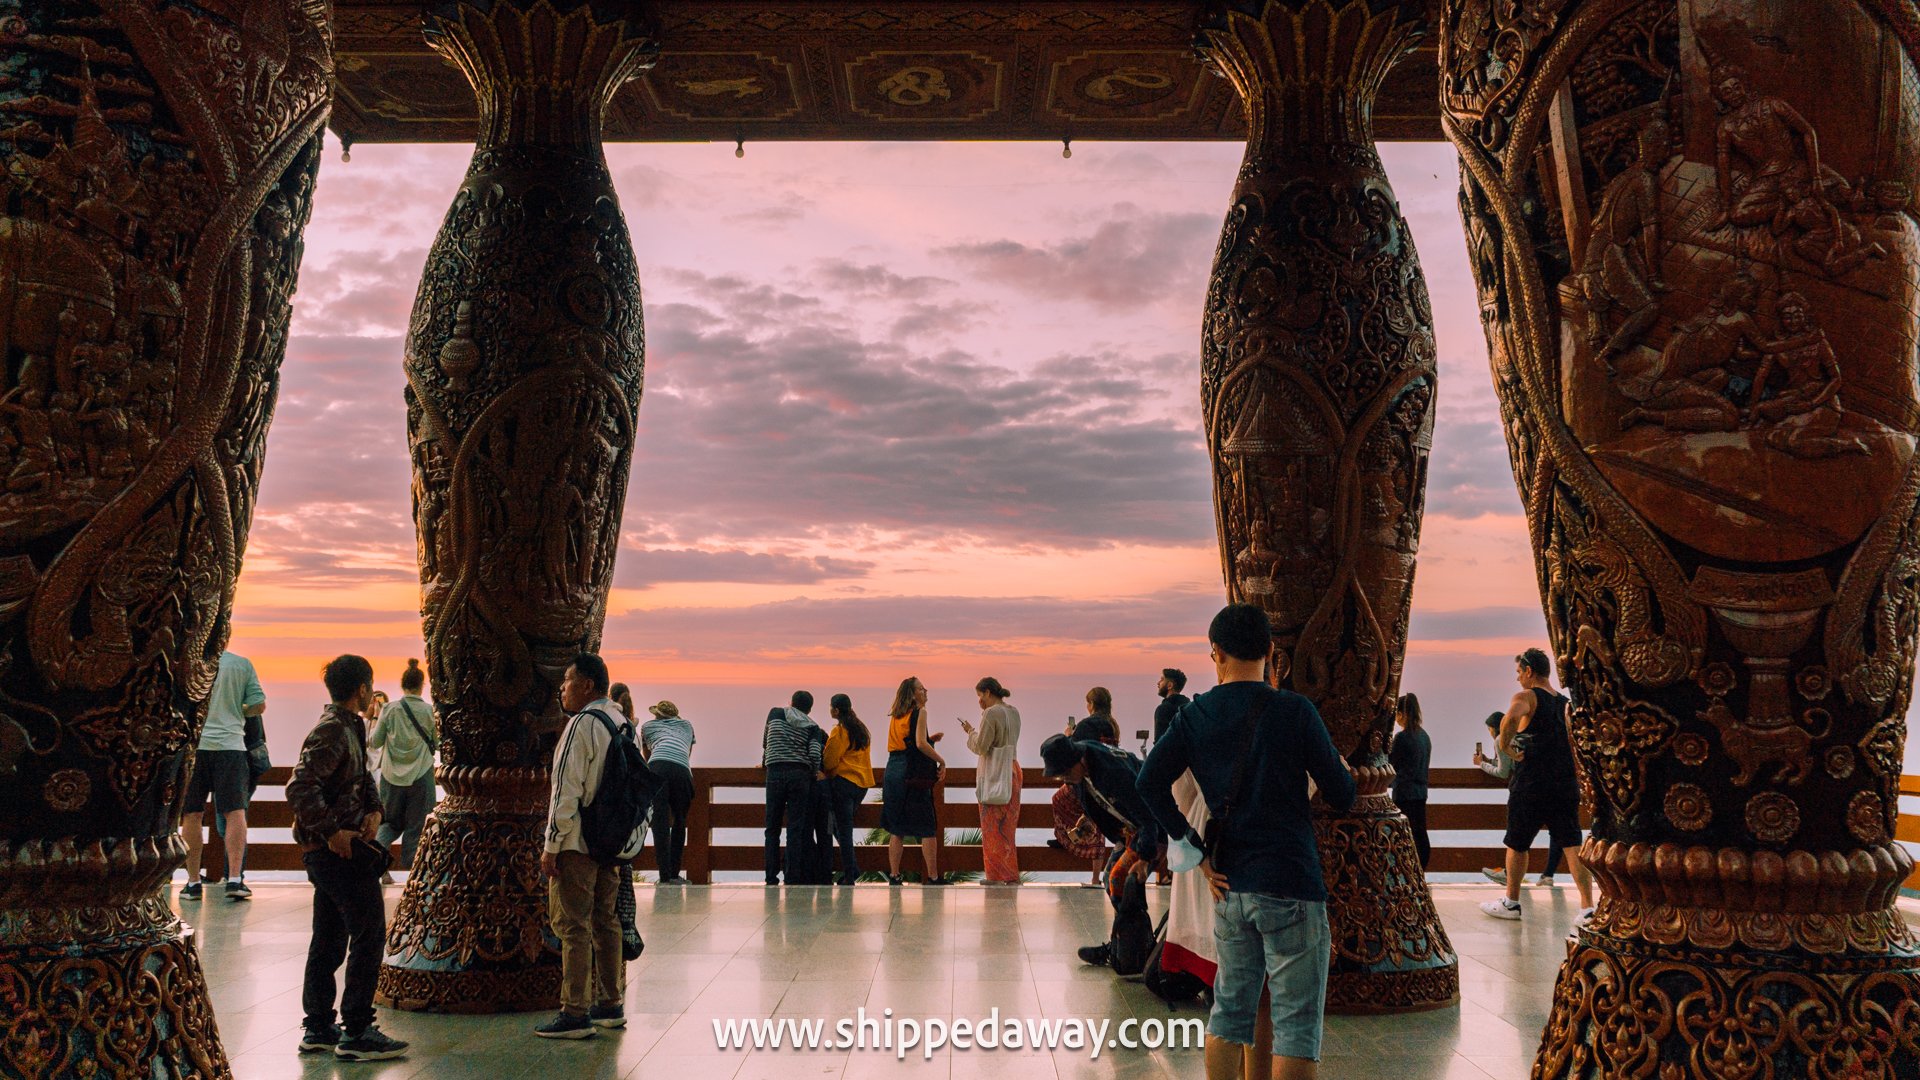 Watching the sunrise over Chiang Mai at Wat Phra That Doi Suthep - Doi Suthep Temple Chiang Mai, Thailand - Travel Guide to Doi Suthep Temple